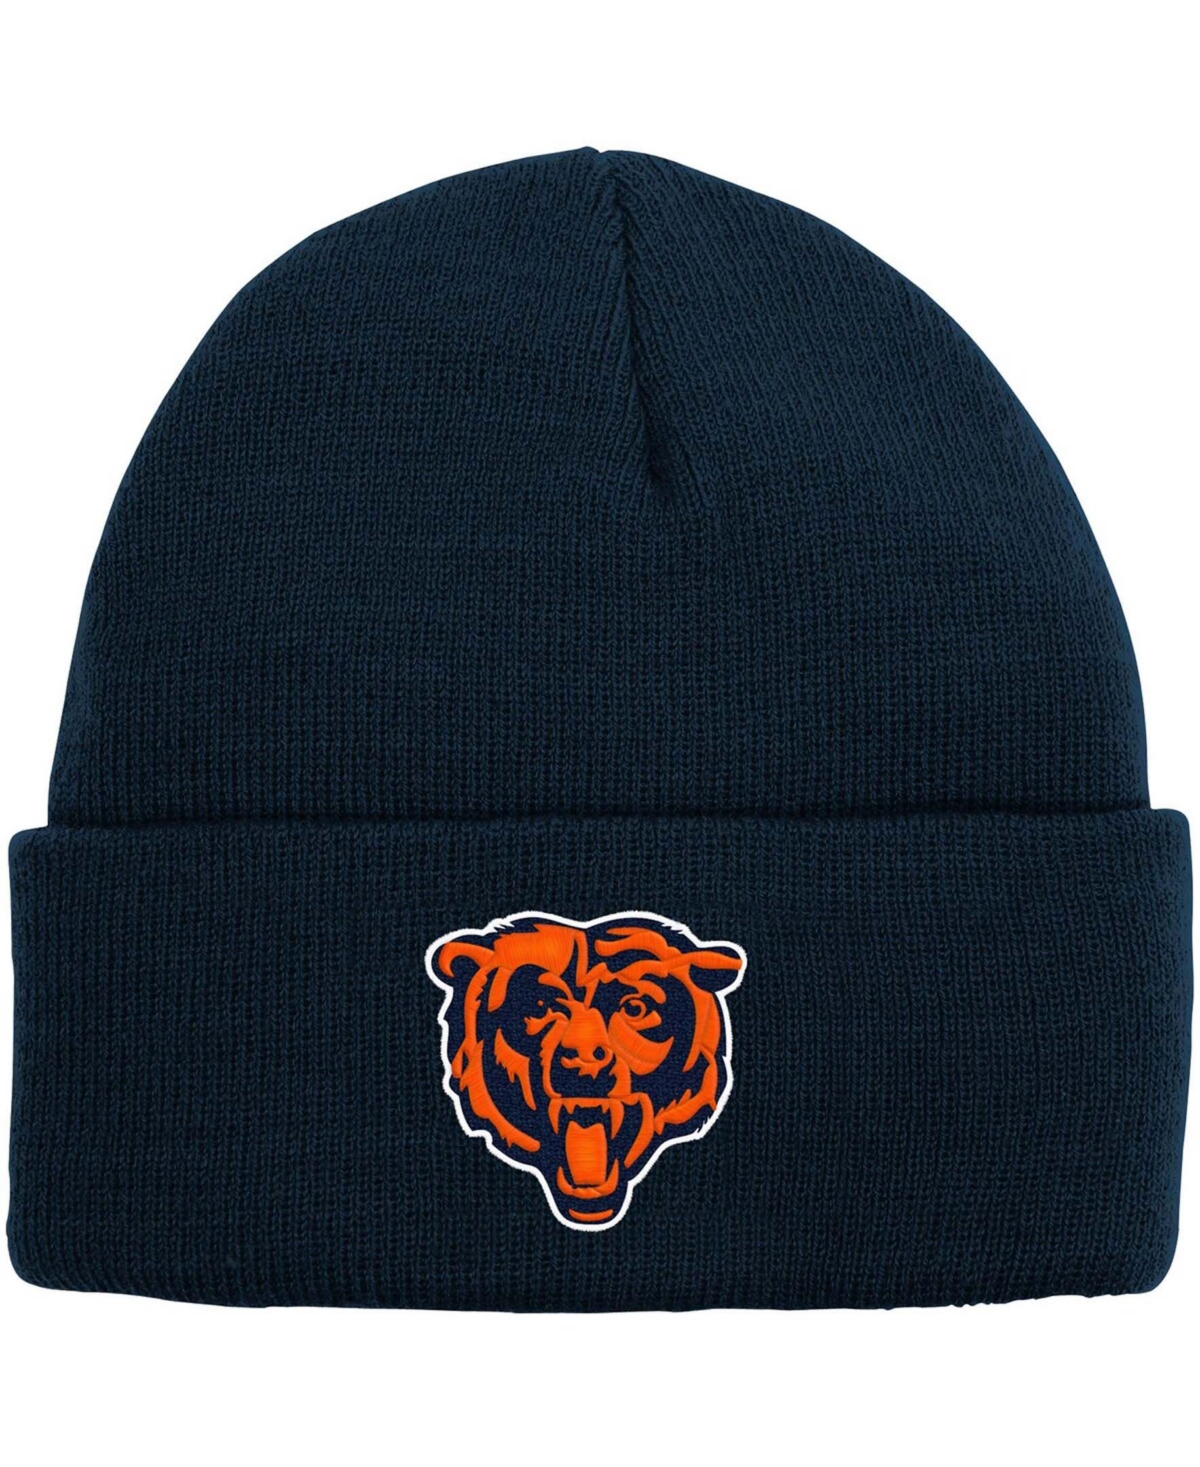 Outerstuff Kids' Big Boys And Girls Navy Chicago Bears Basic Cuffed Knit Hat